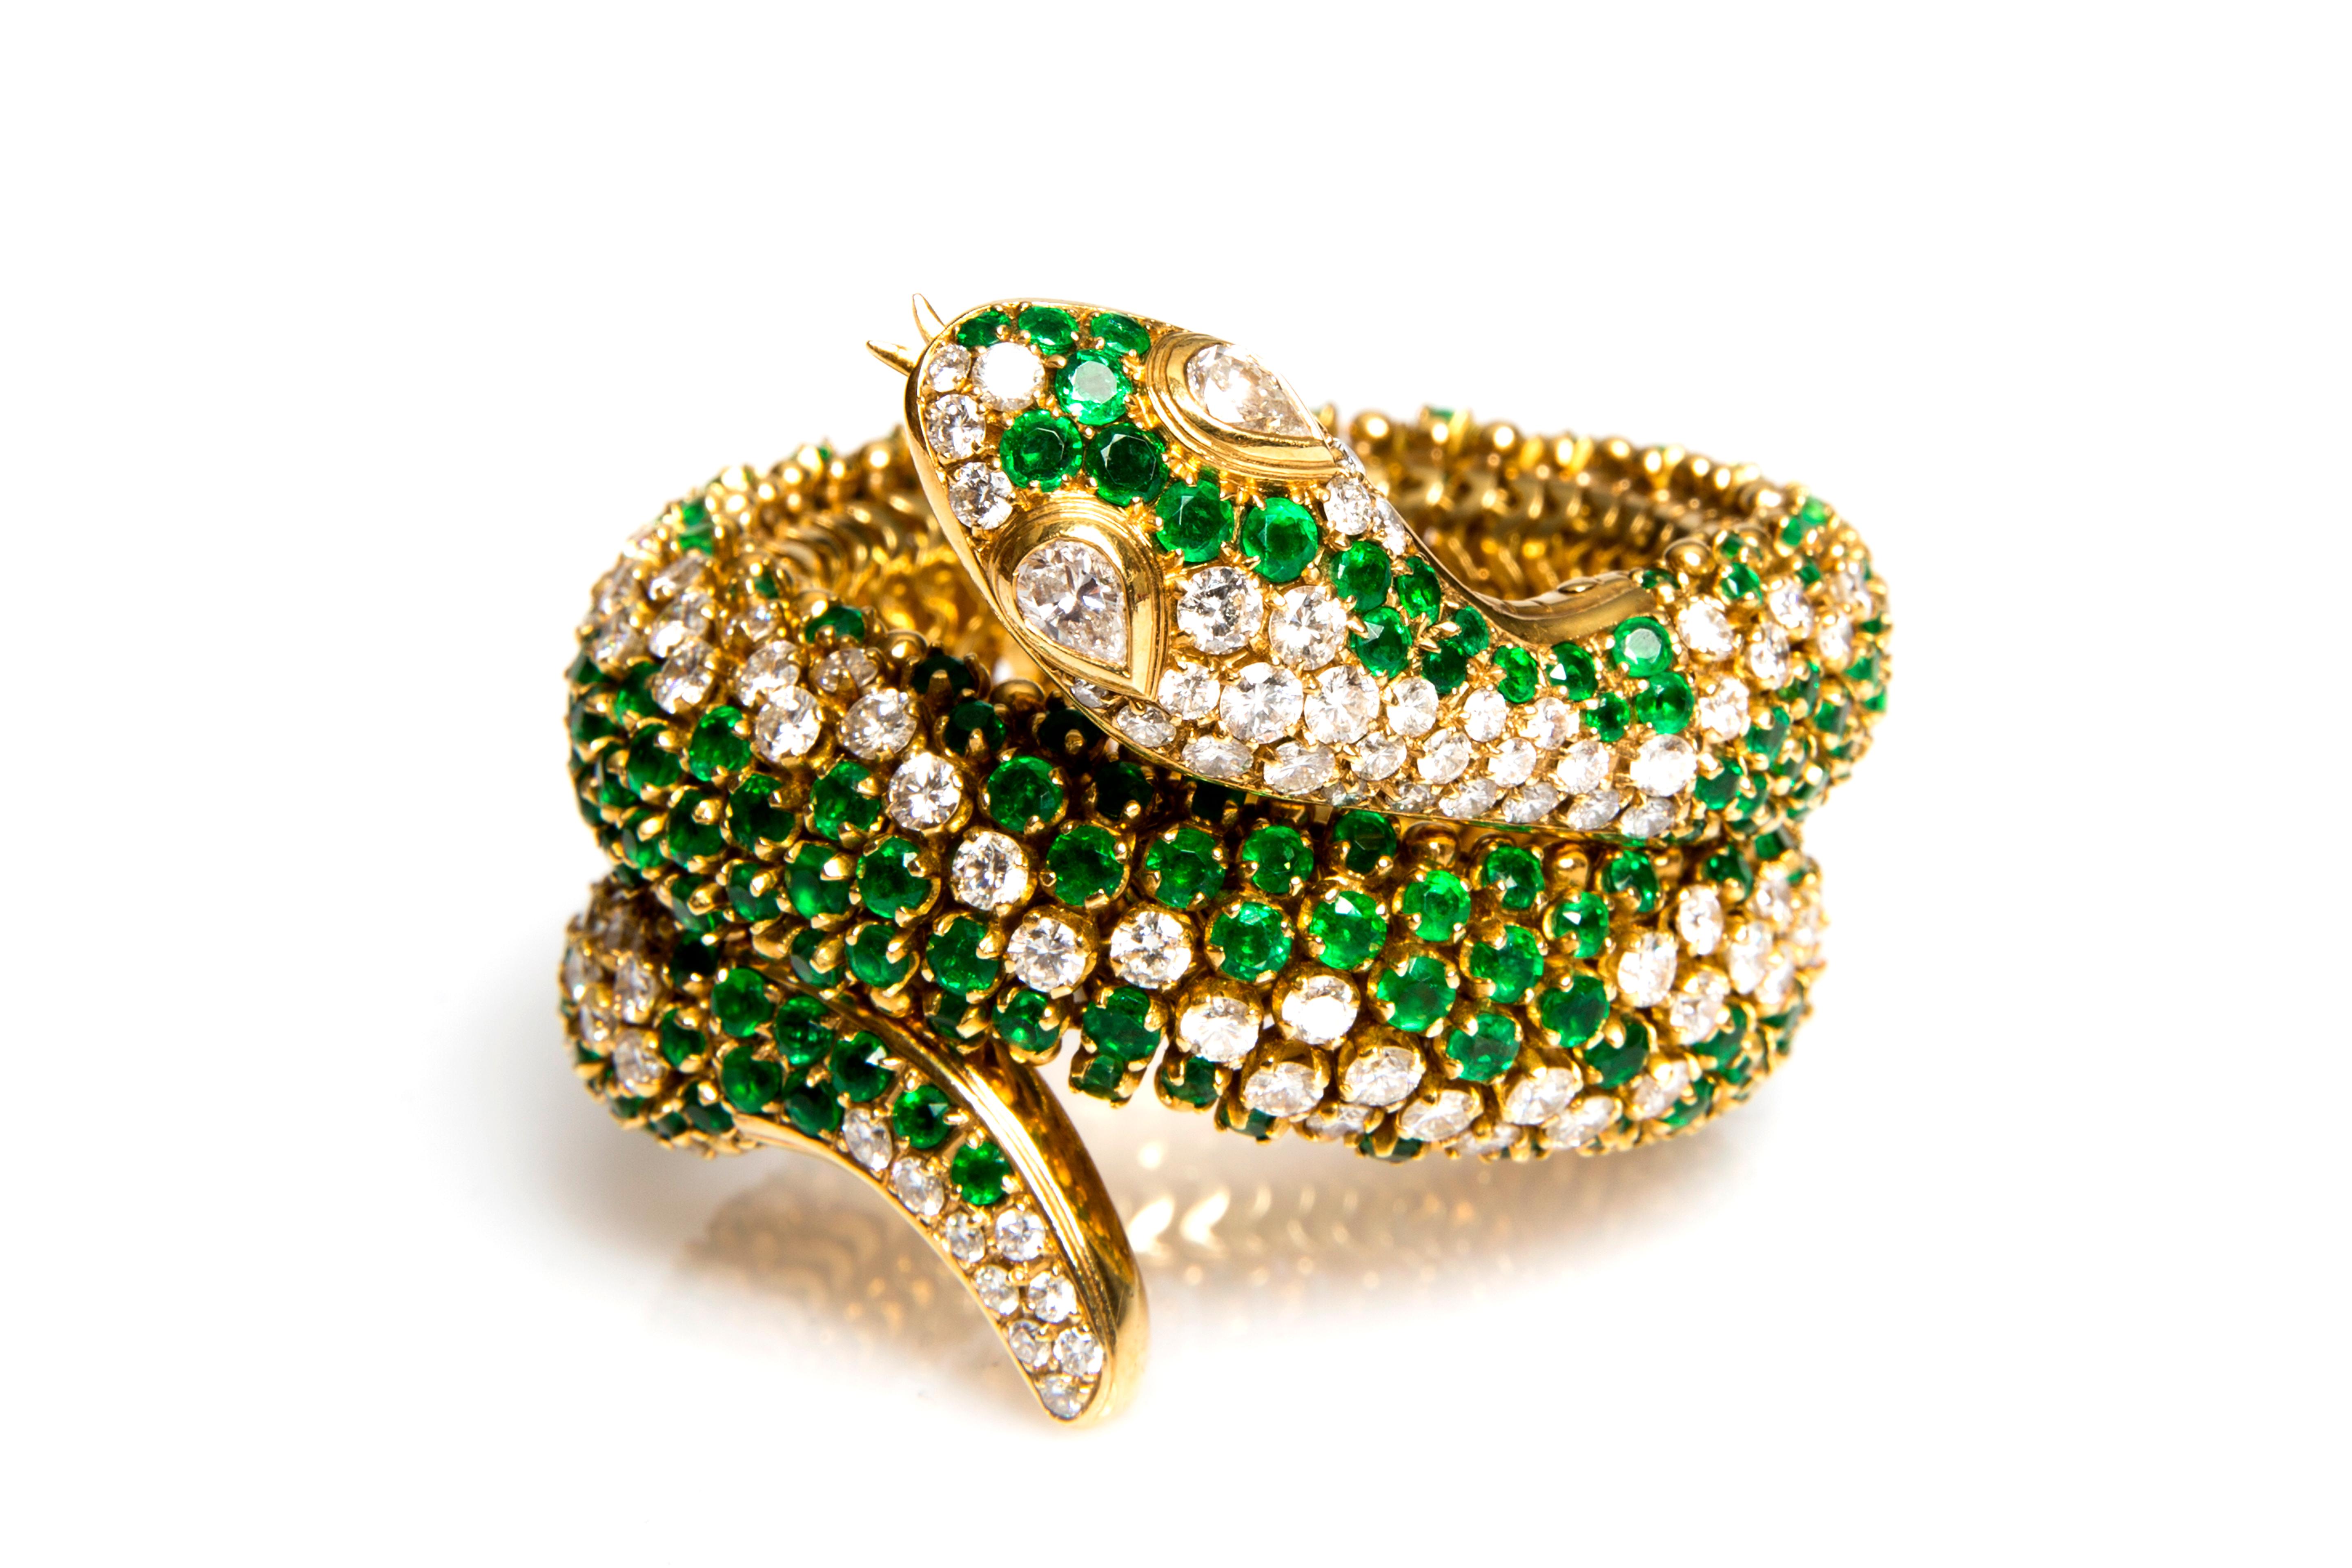 Exclusive piece of our collection, this colorful Sea Snake bangle bracelet has been handcrafted with love and care. Its structure is made of Diamonds 141 brilliants ca 7.6ct, emeralds 5.0 ct and Yellow gold 18K.
We believe this unique jewel will